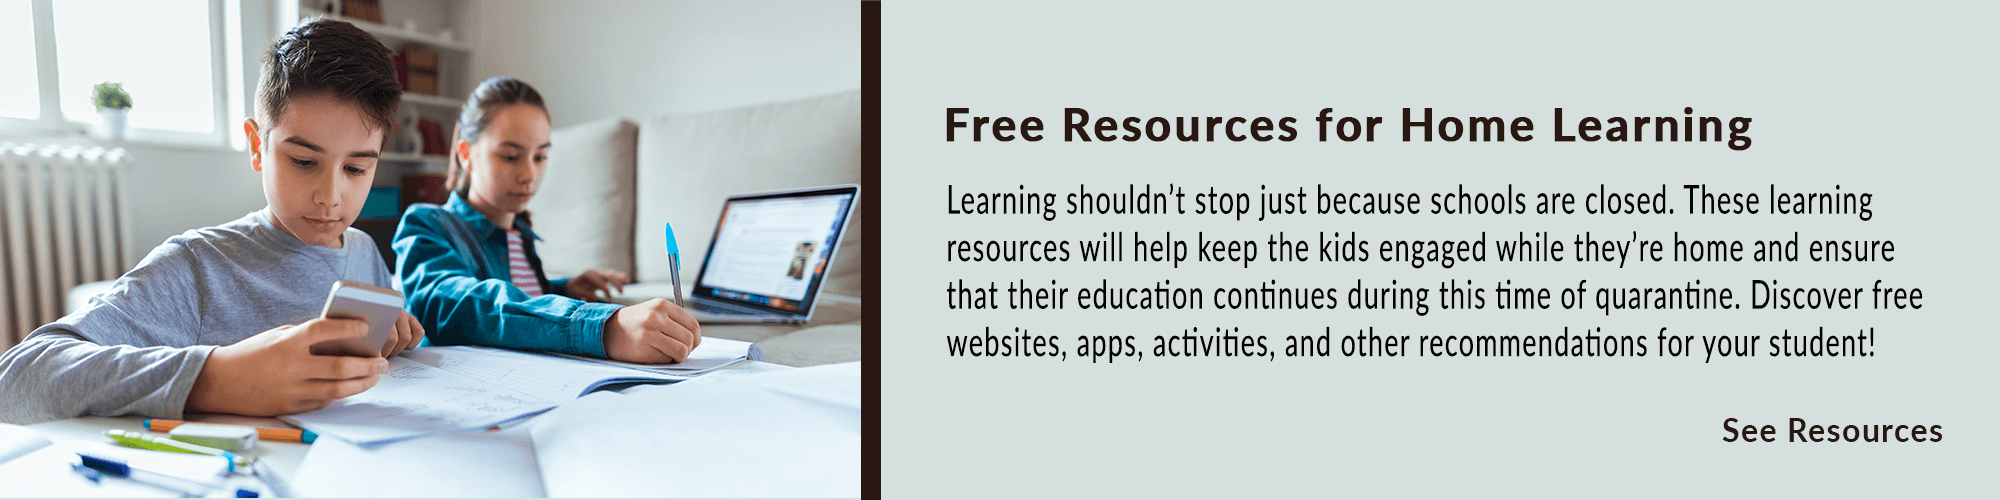 Free Learning Resources